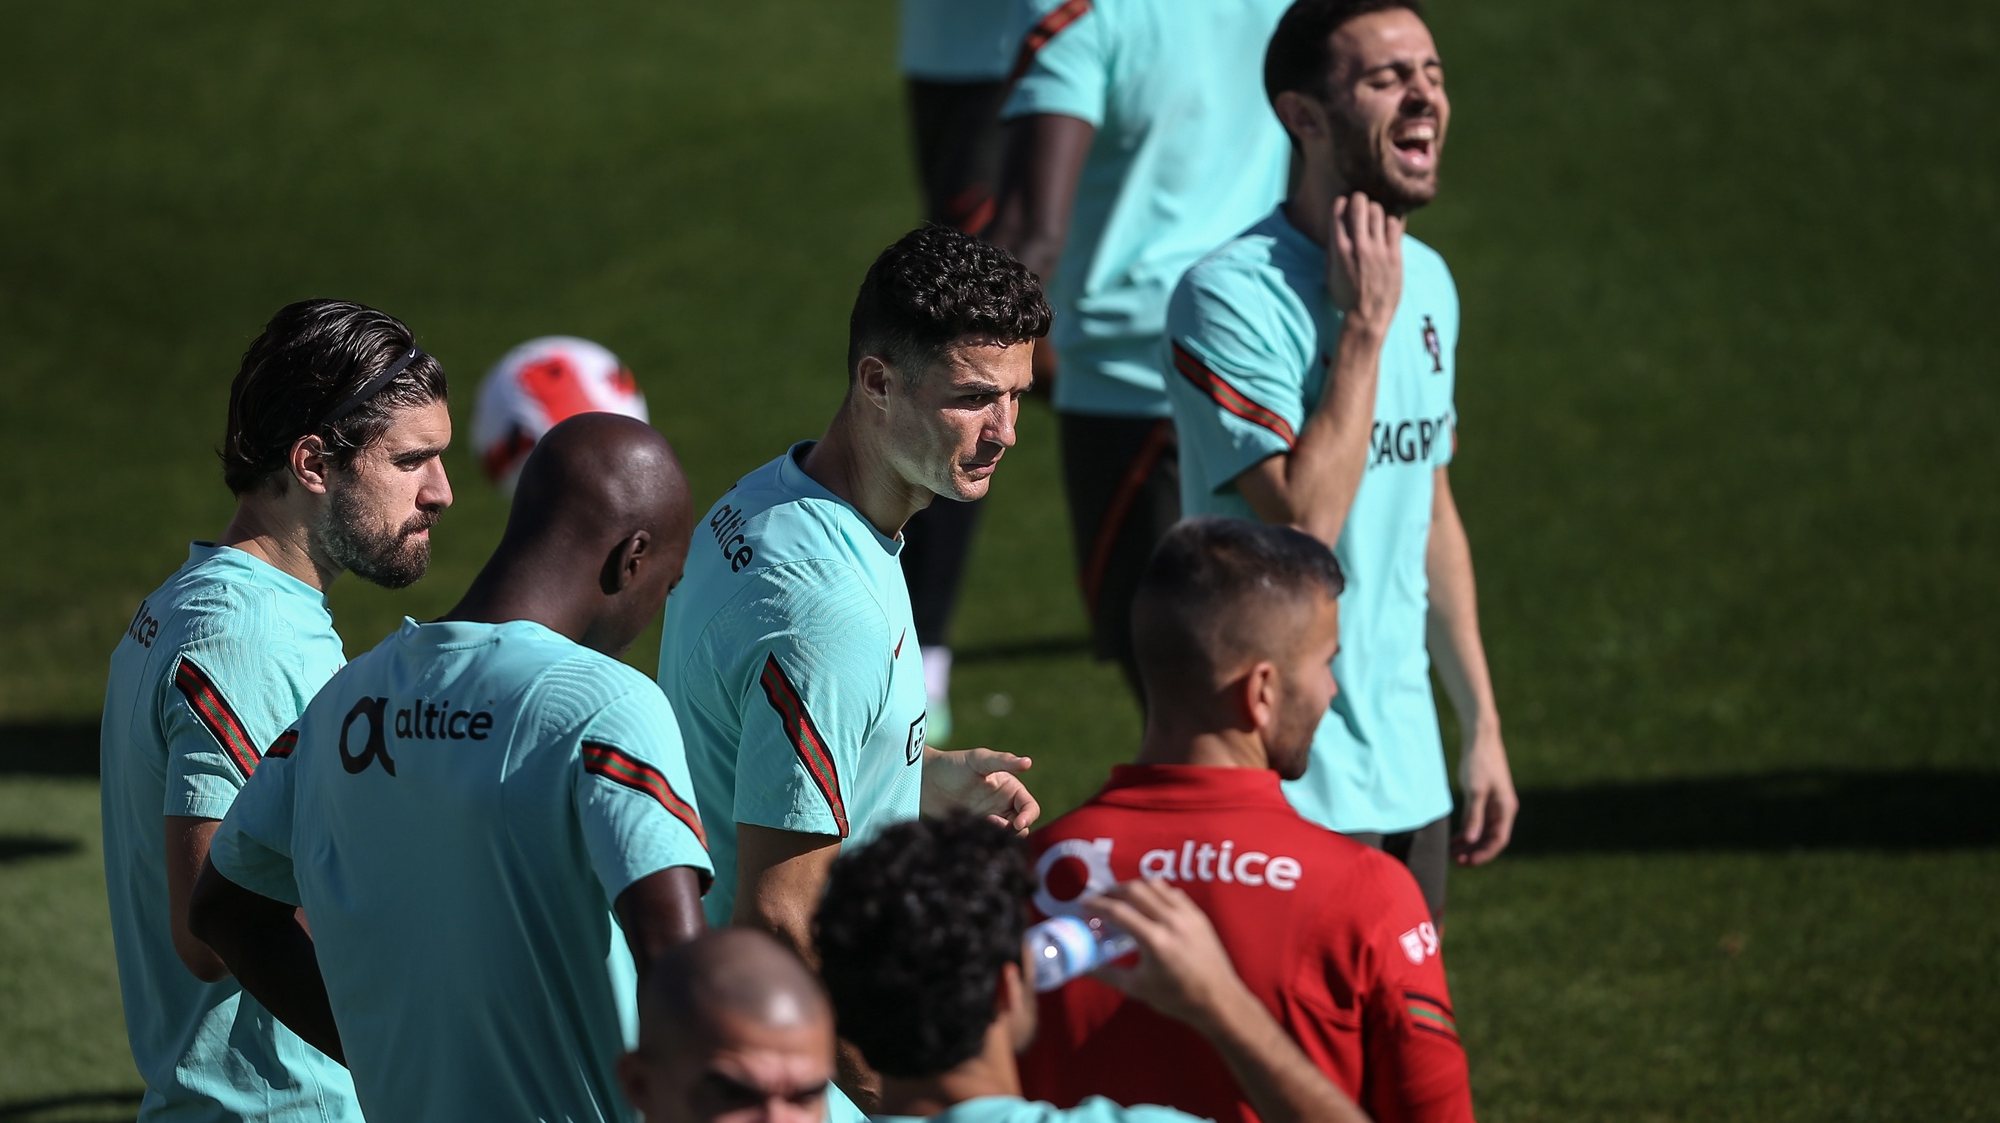 Portugal player Rúben Neves (L), Cristiano Ronaldo (C) and Bernardo Silva (R) during the stage of the Portuguese National Team preparation for the FIFA World Cup Qatar 2022, in Oeiras, outskirts of Lisbon, Portugal, 06 October 2021.  RODRIGO ANTUNES/LUSA